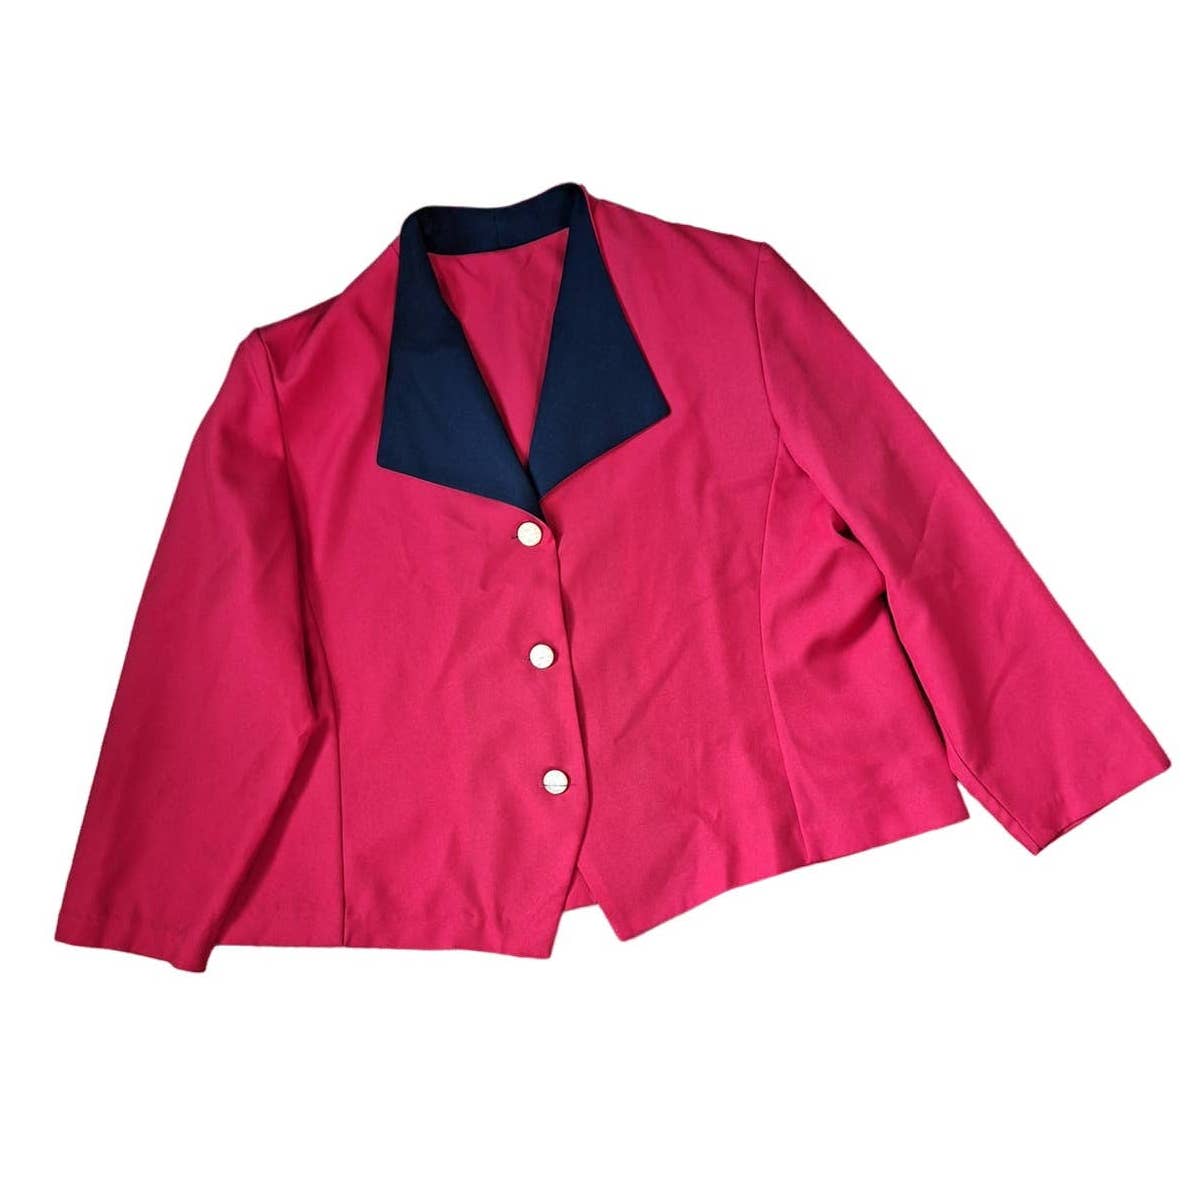 Vintage 80s Red Blazer with Black Collar Size 22 2X/3X - themallvintage The Mall Vintage